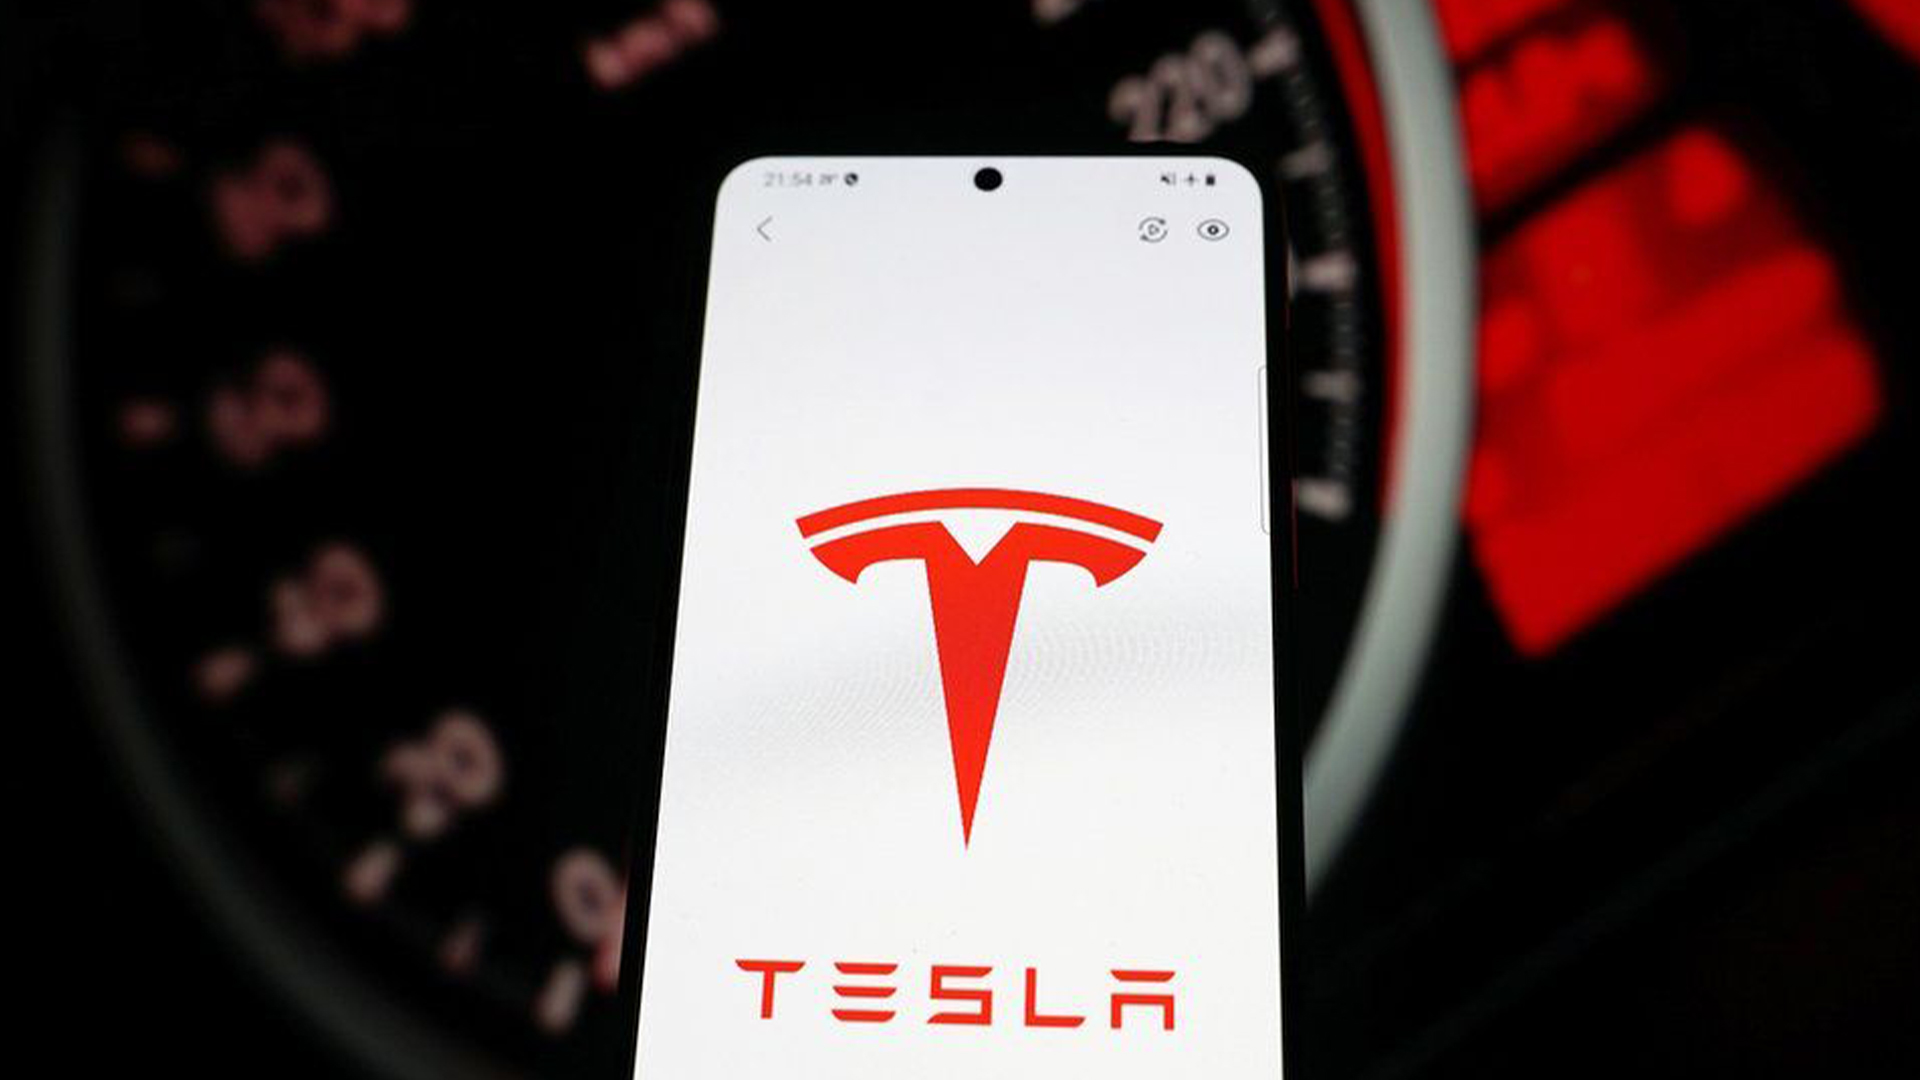  The Tesla app is used as a key by drivers to unlock their cars. Getty Images